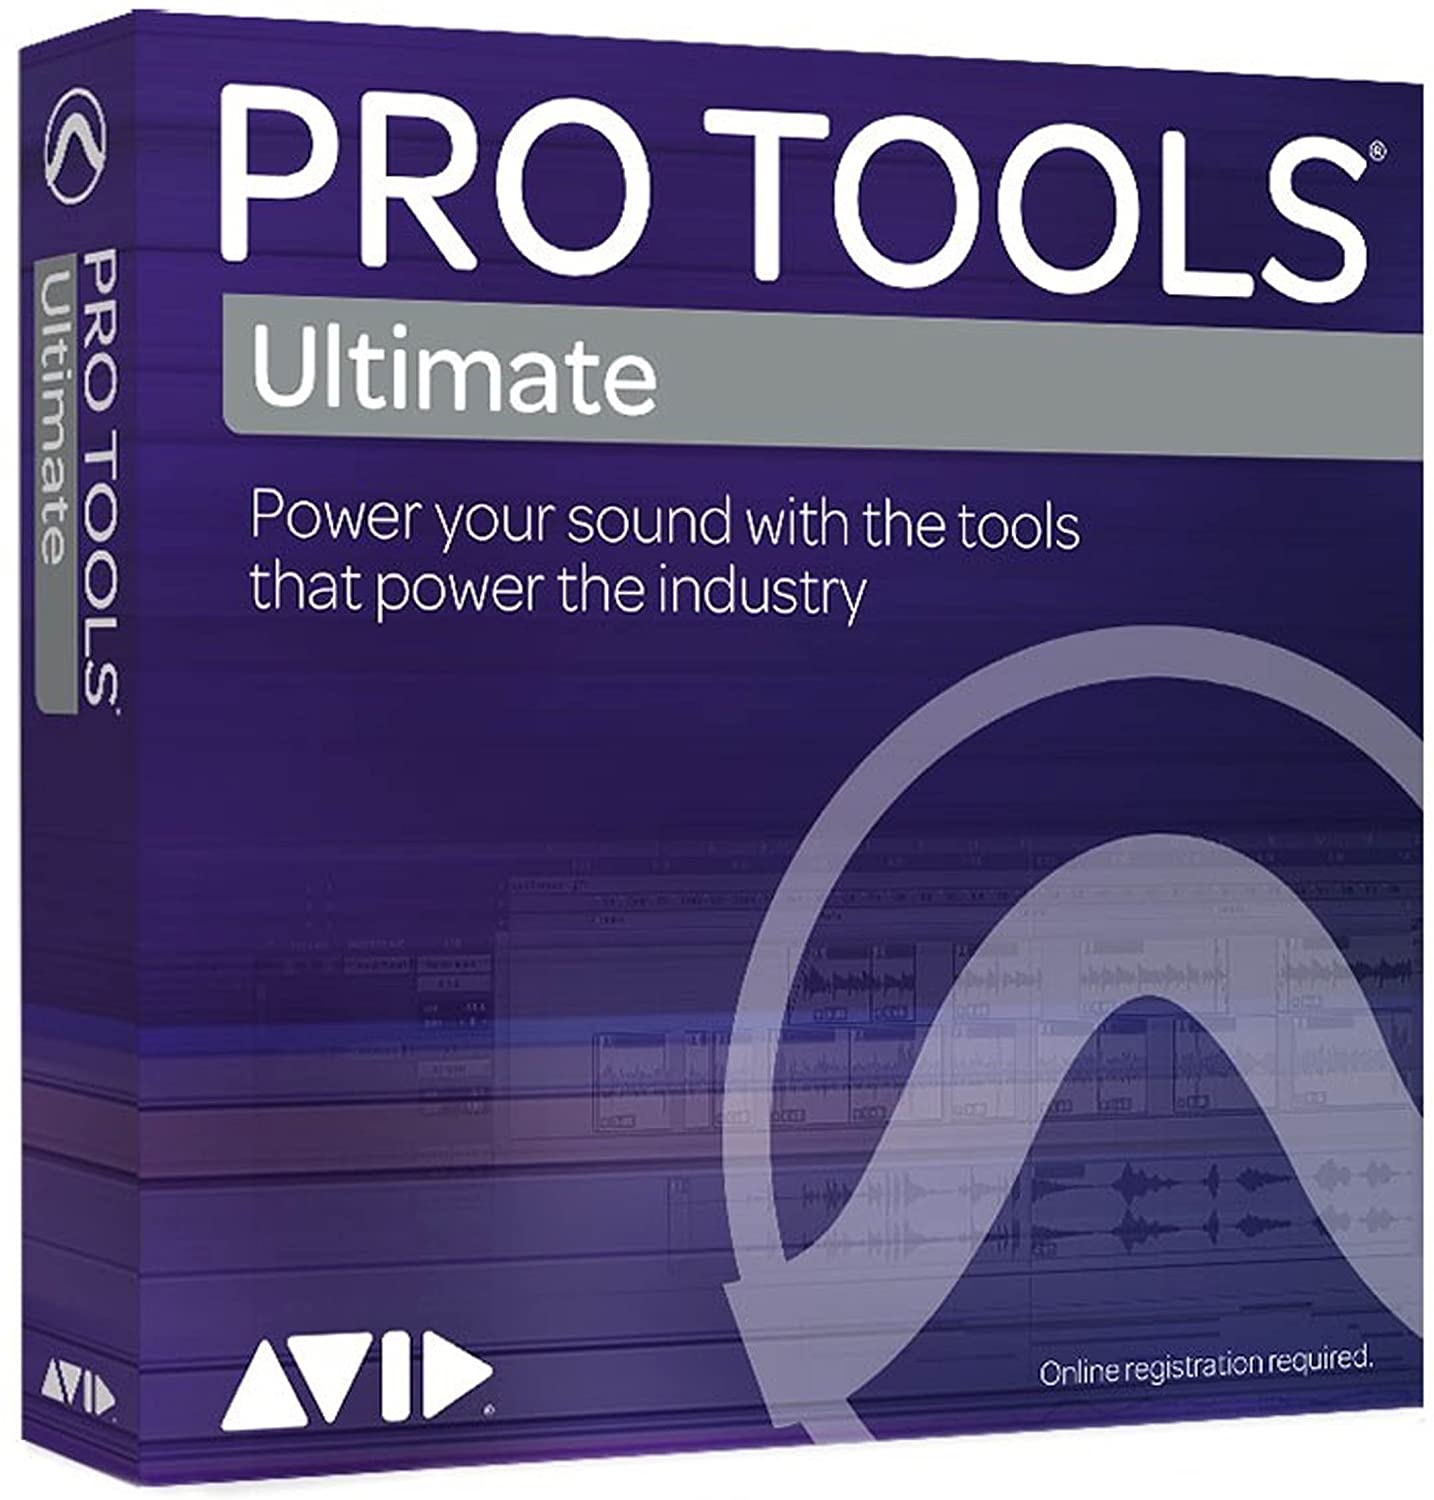 pro tools free download full version cracked mac